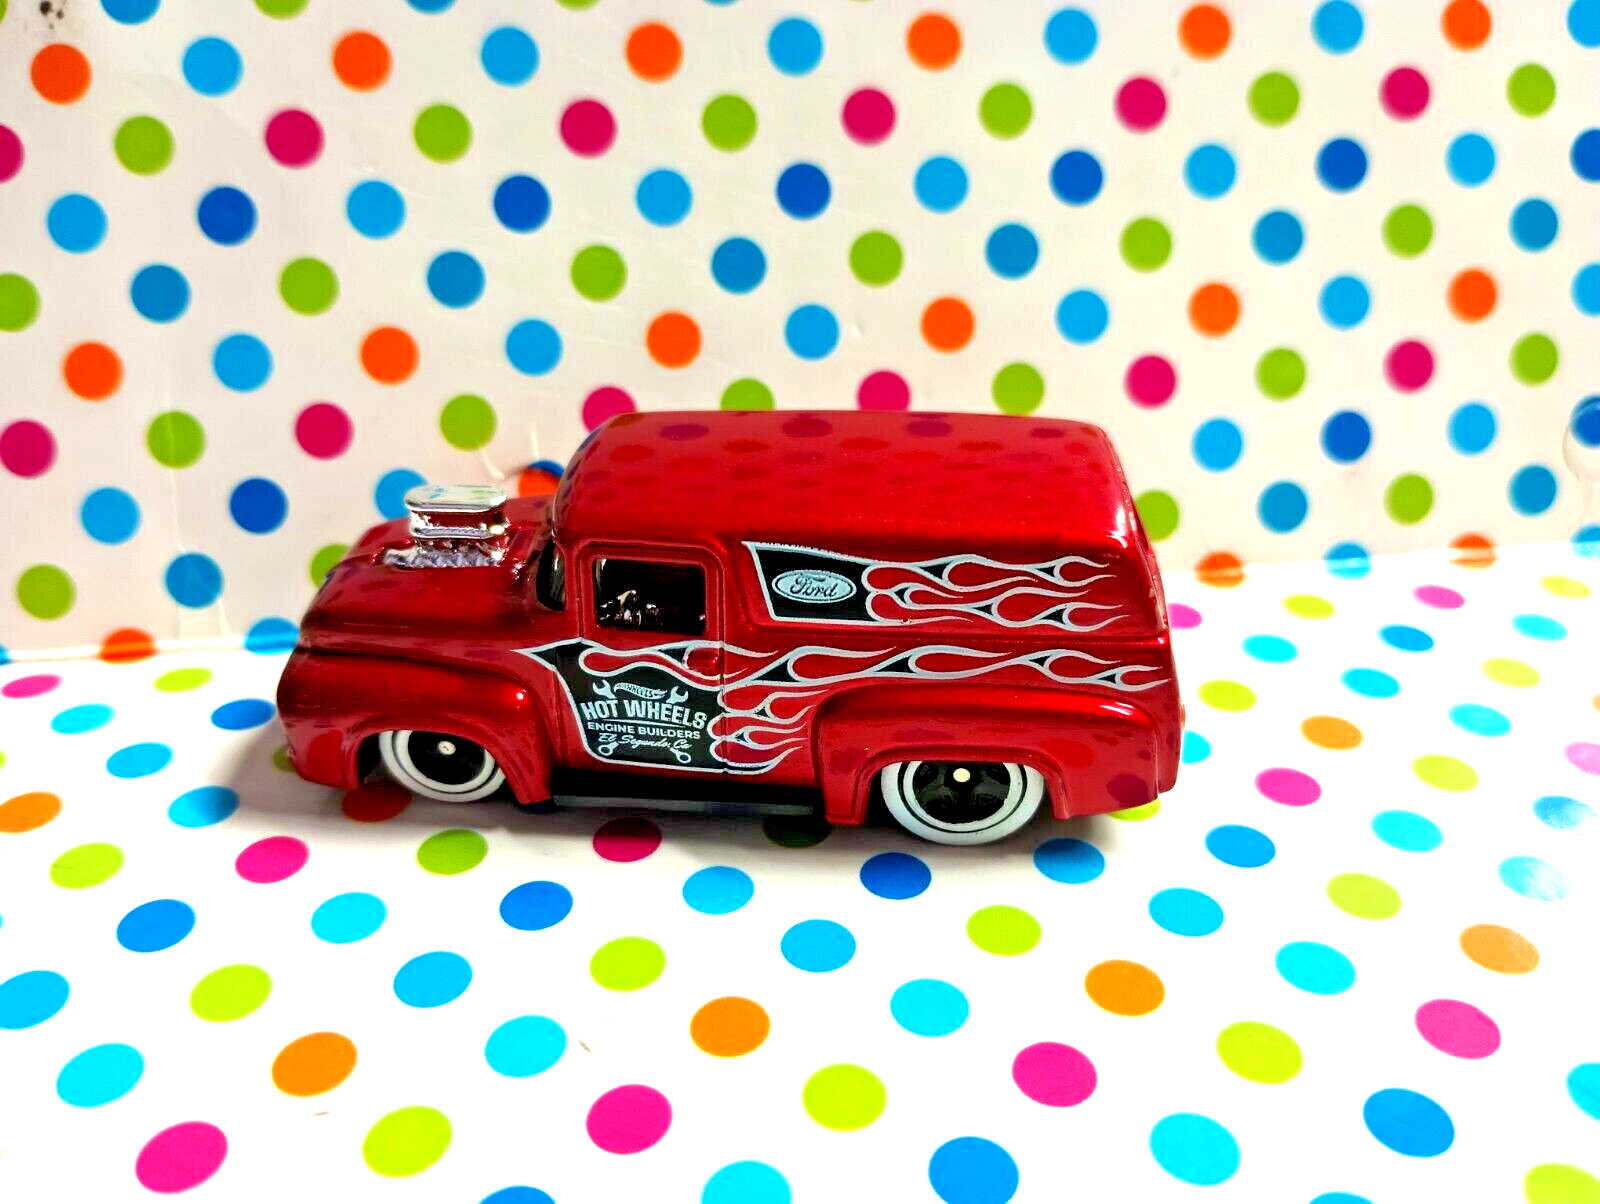 HOT WHEELS FROM 5 PACK 2014 WH FLAMES '56 FORD F-100 LOOSE NEVER PLAYED